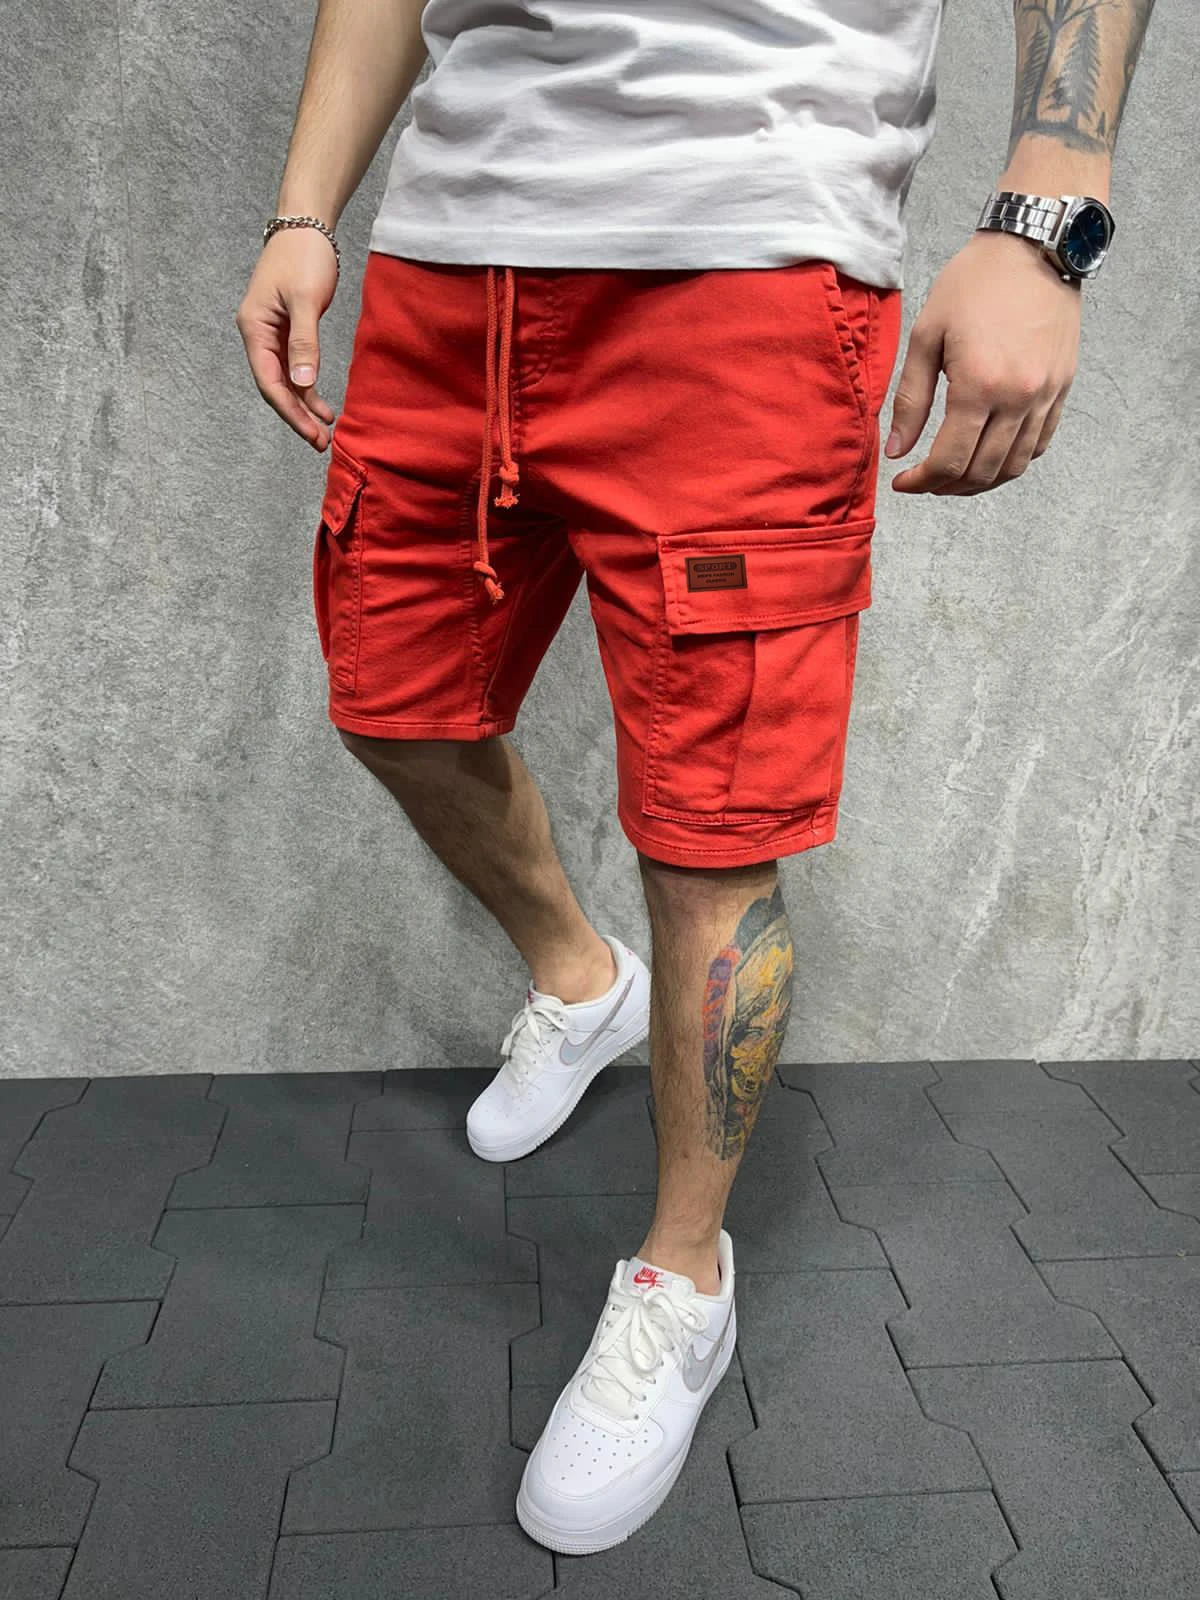 

Men's Summer Breeches and Shorts 2021 Woven Pocket Paste Leather Cargo Shorts Homme classic Brand Clothing Casual Shorts